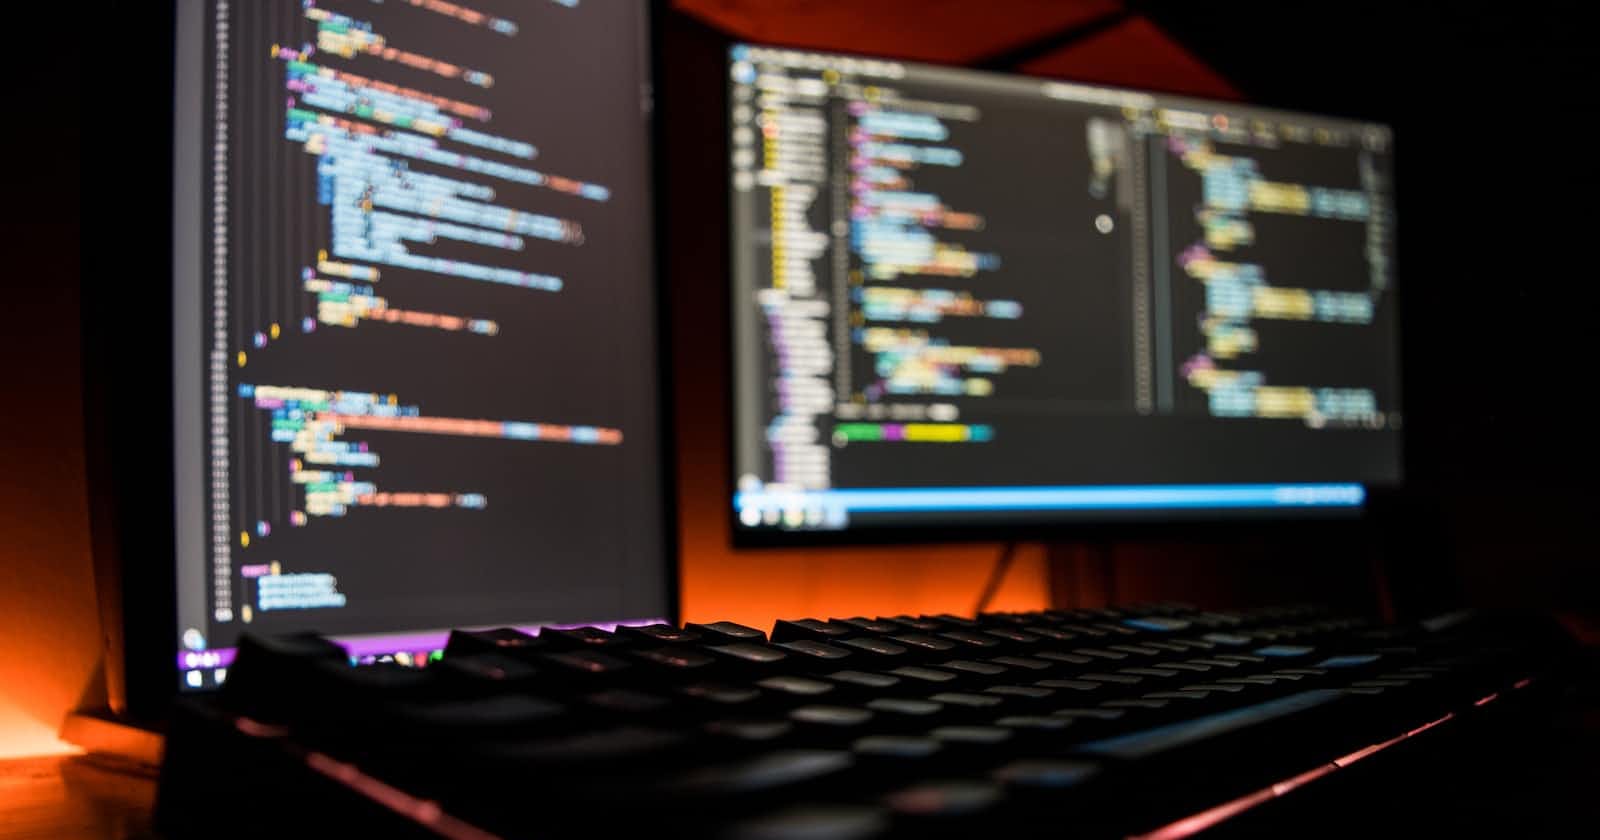 Getting Started with Programming